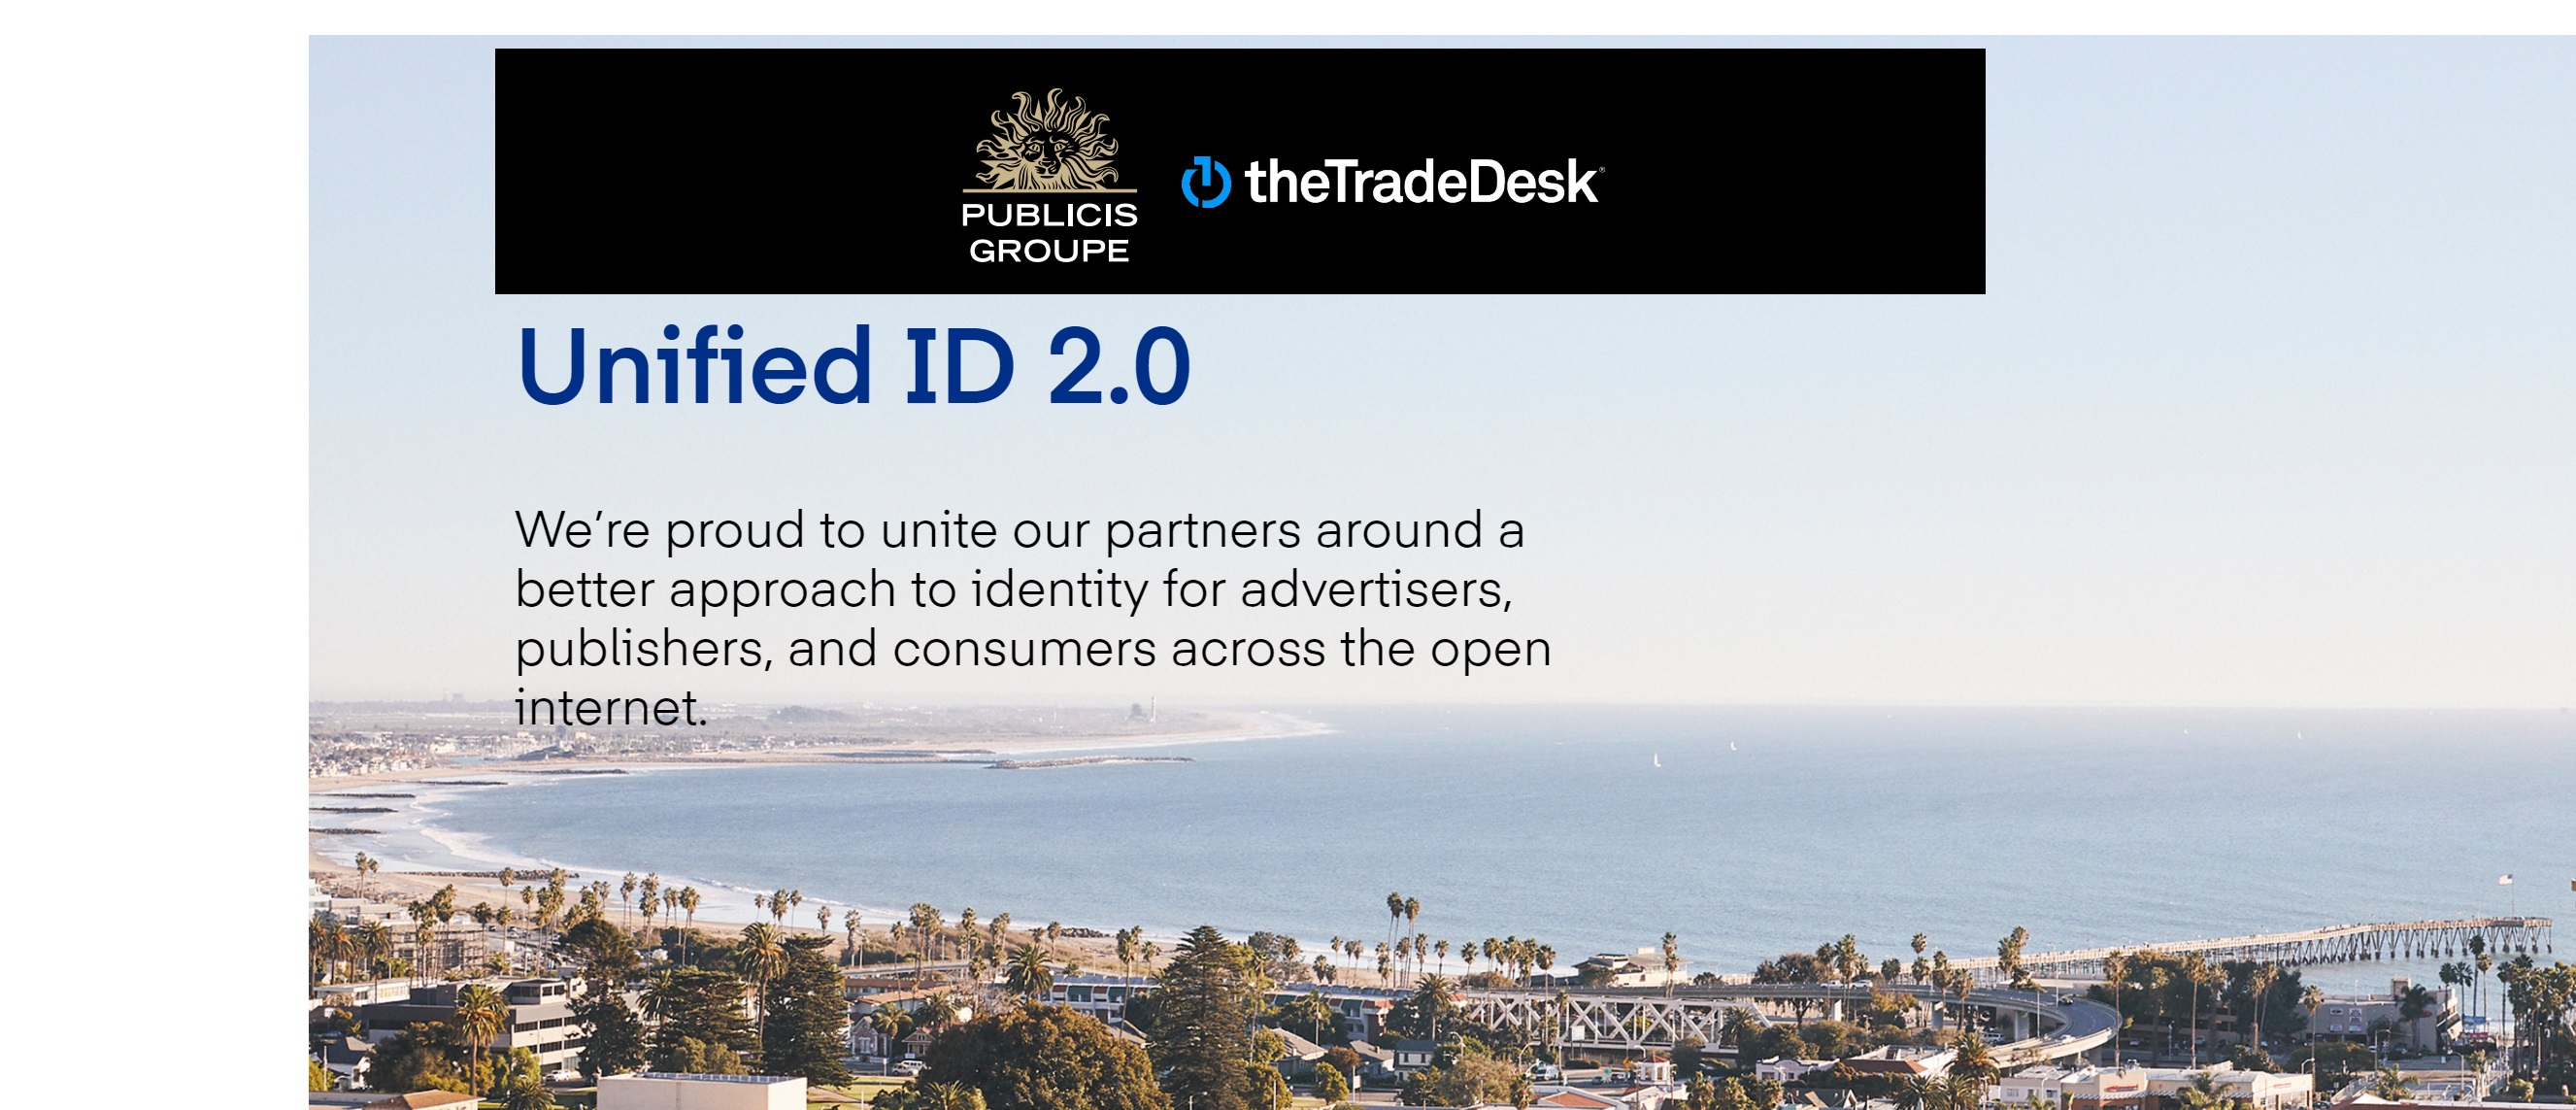 Unified ID Solution 2.0 ,The Trade Desk, publicis groupe,programapublicidad